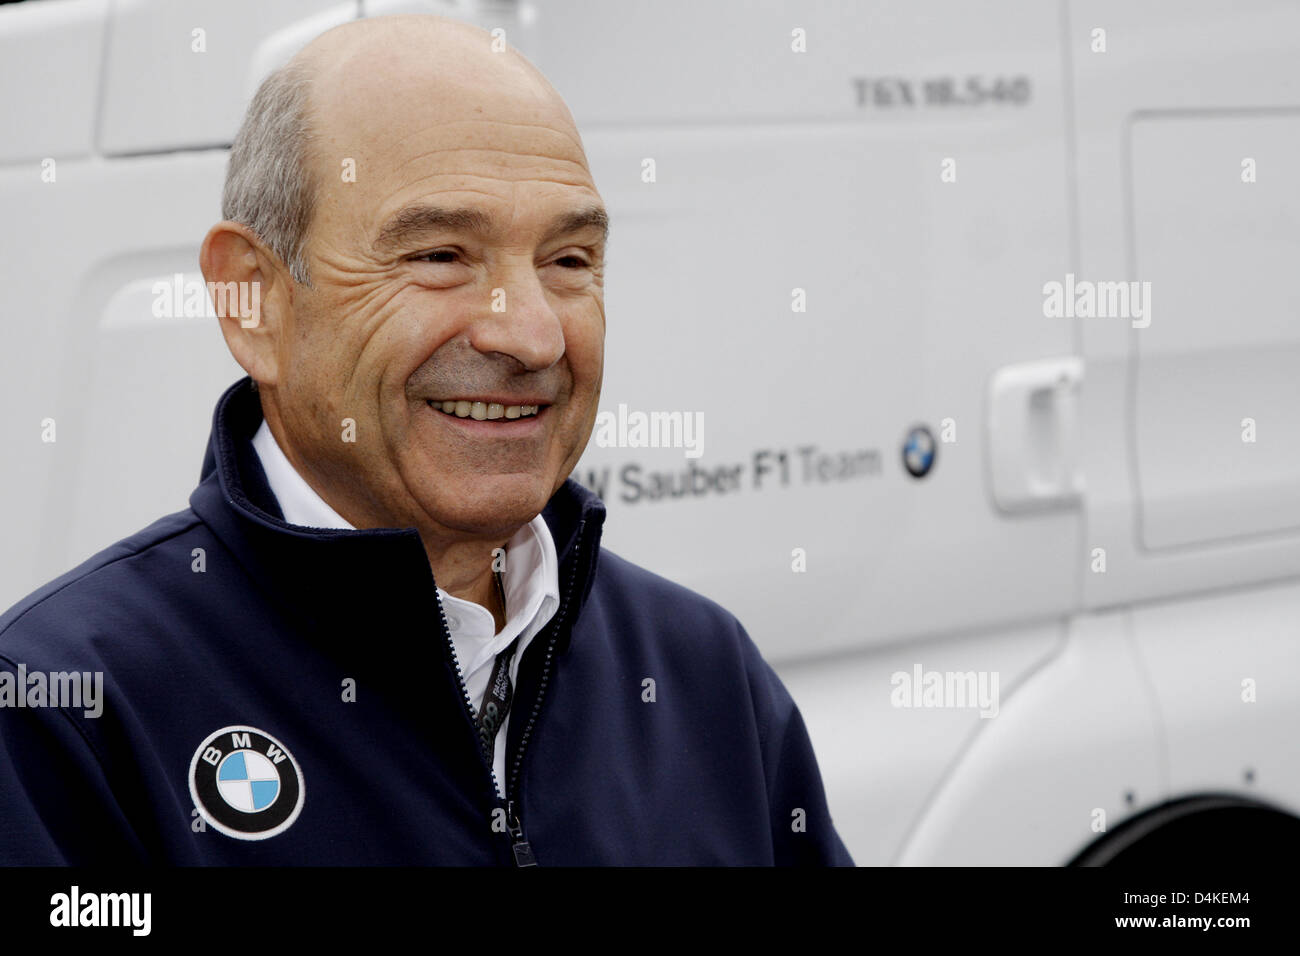 Swiss Peter Sauber, team advisor of BMW Sauber F1 Team, seen in the paddock prior to the Grand Prix of Germany at the Nuerburgring in Nuerburg, Germany, 12 July 2009. Photo: JENS BUETTNER Stock Photo